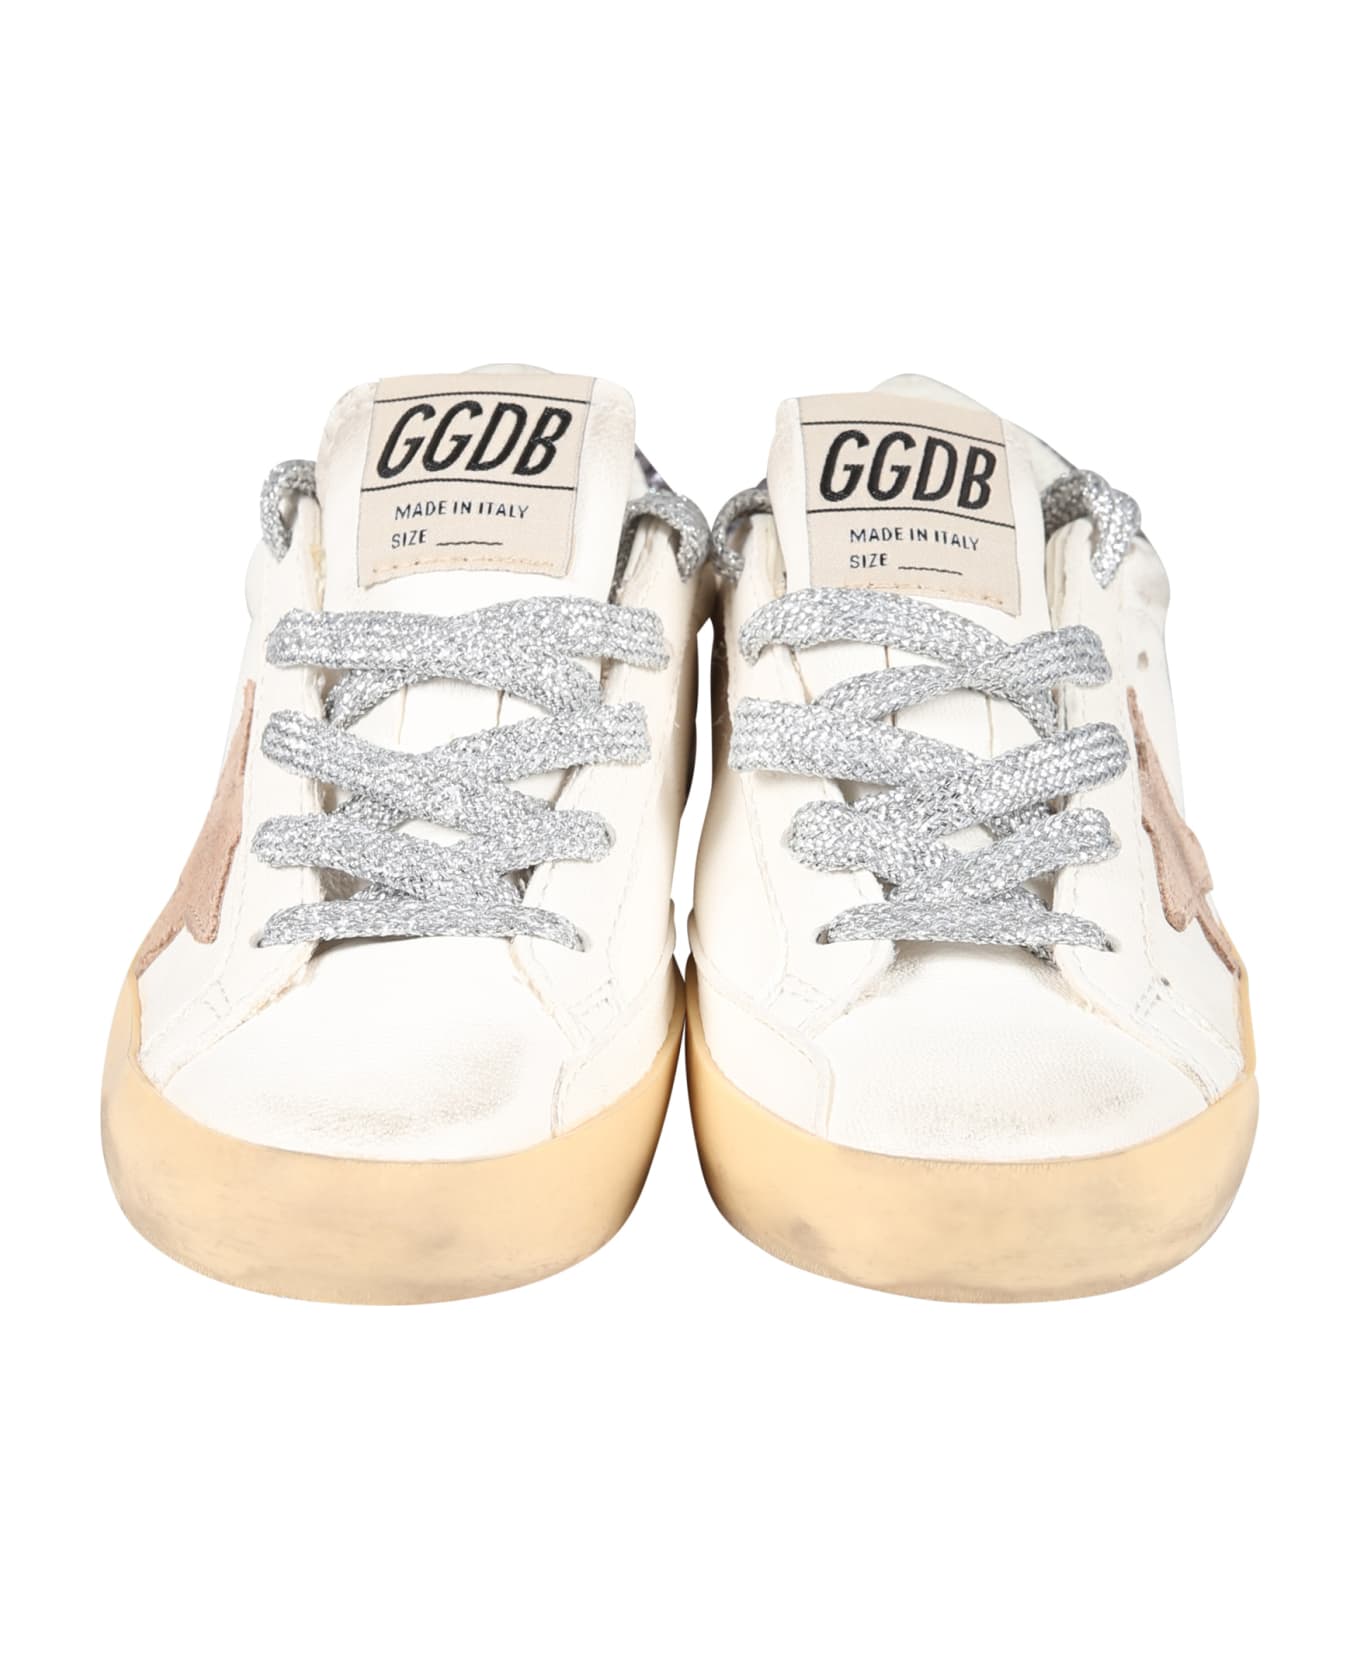 Golden Goose White Sneakers For Girl With Star - White